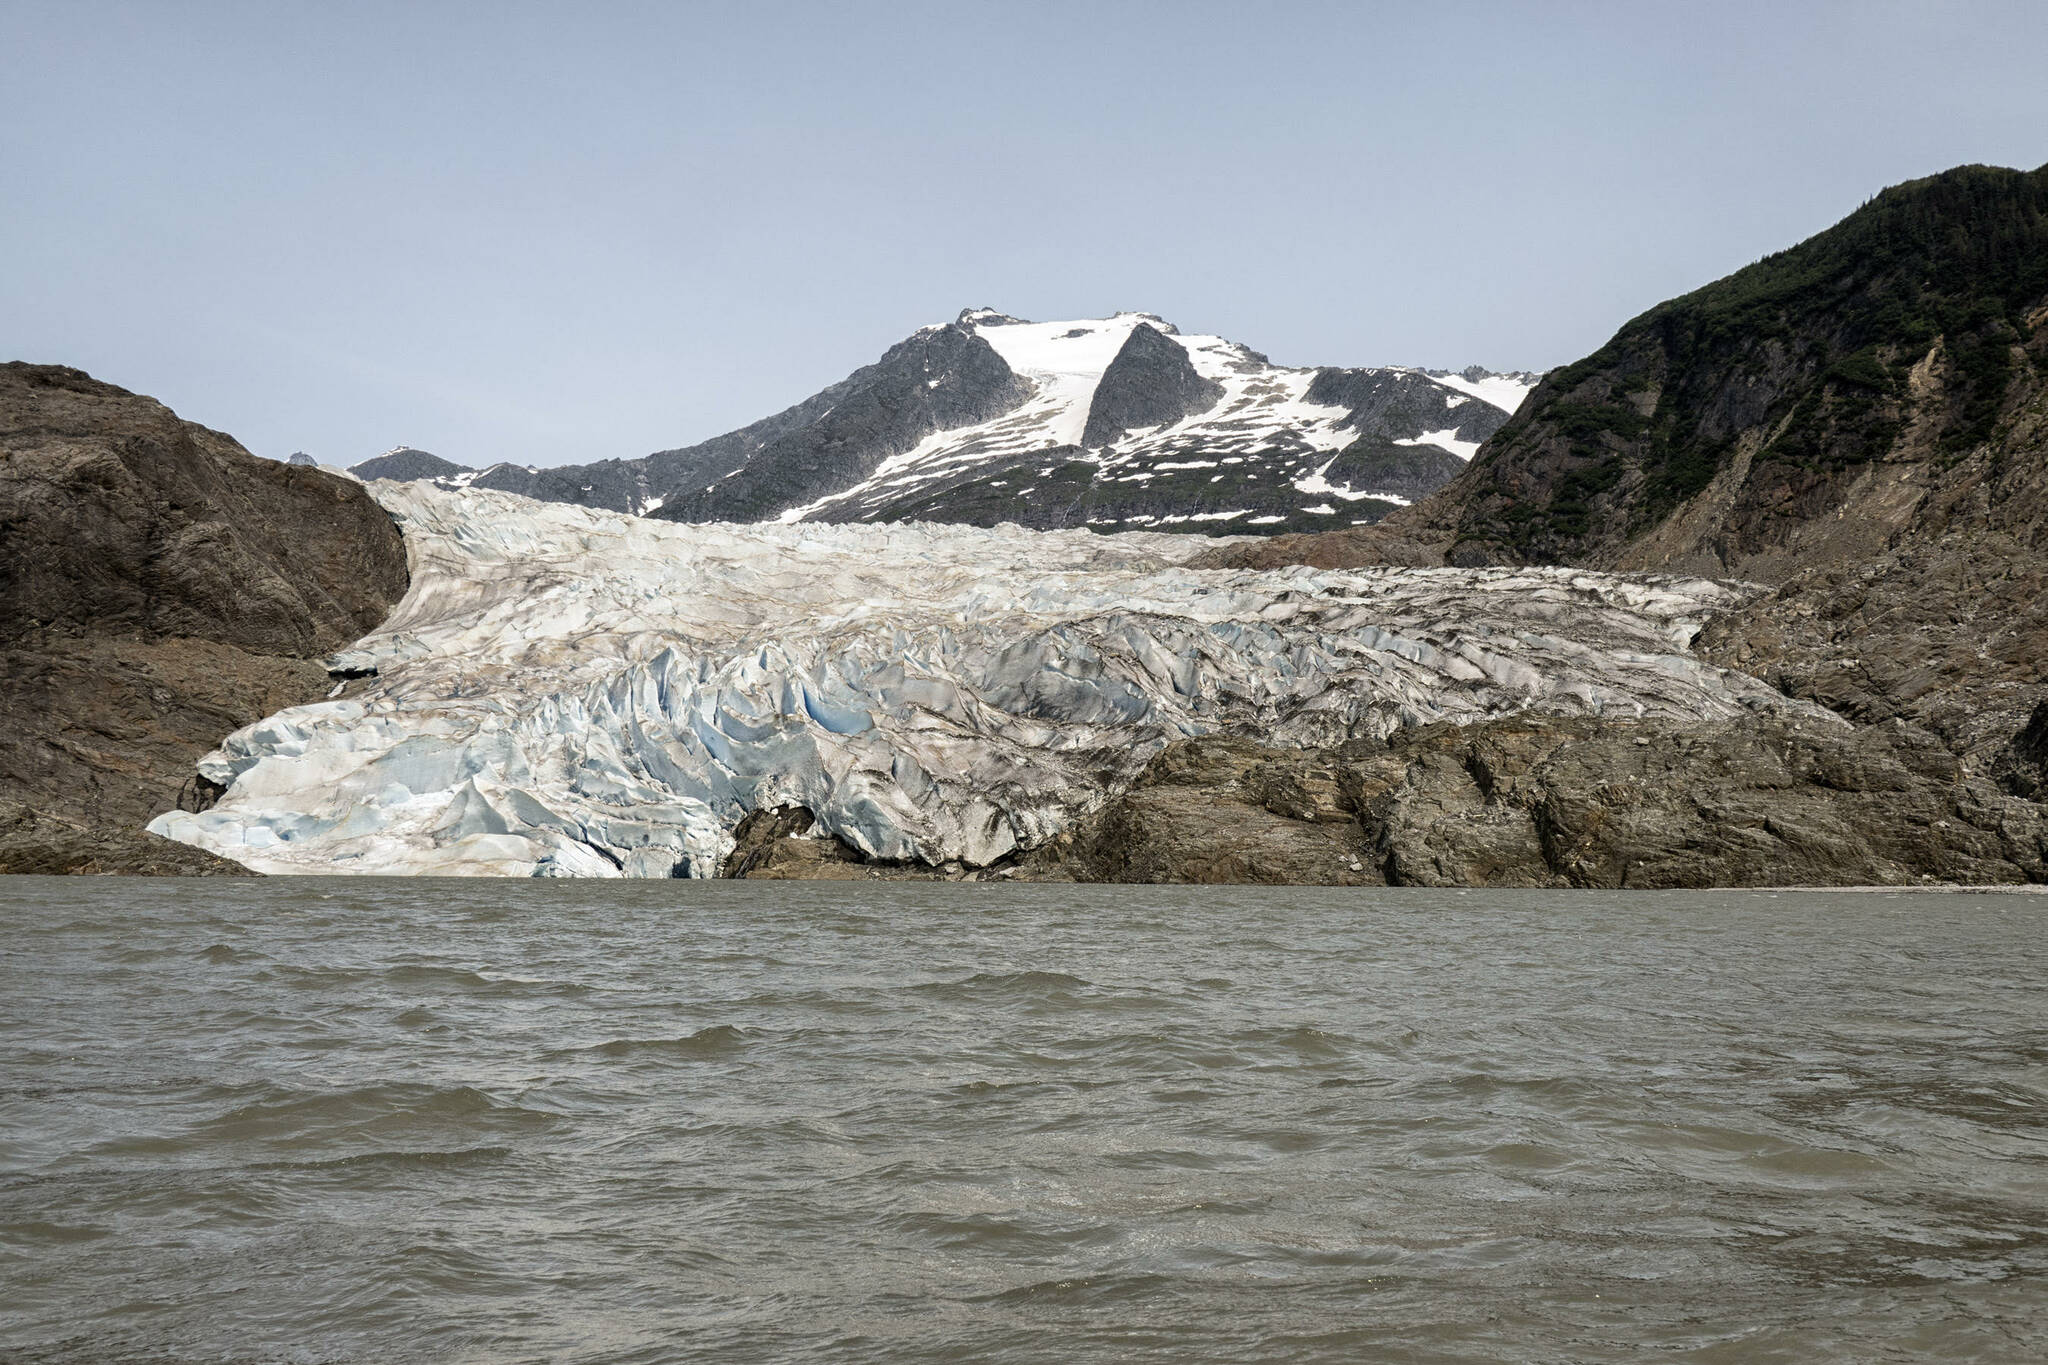 The Mendenhall Glacier on July 14. (Courtesy Photo / Kenneth Gill, gillfoto)